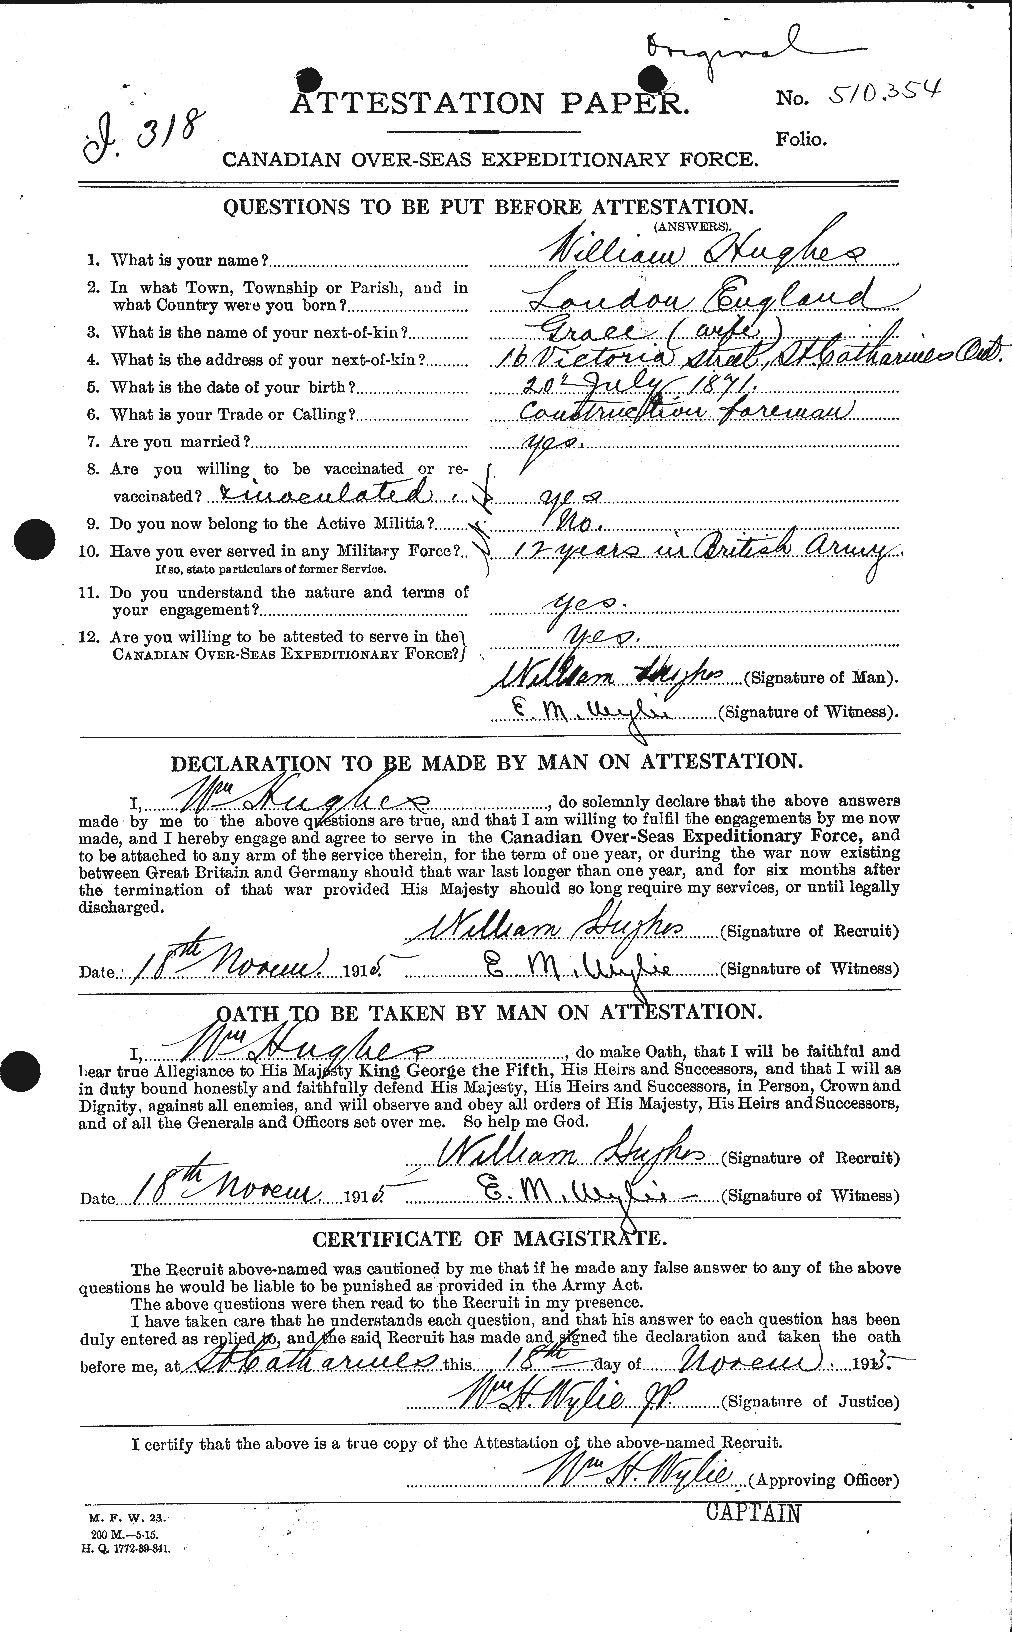 Personnel Records of the First World War - CEF 405885a